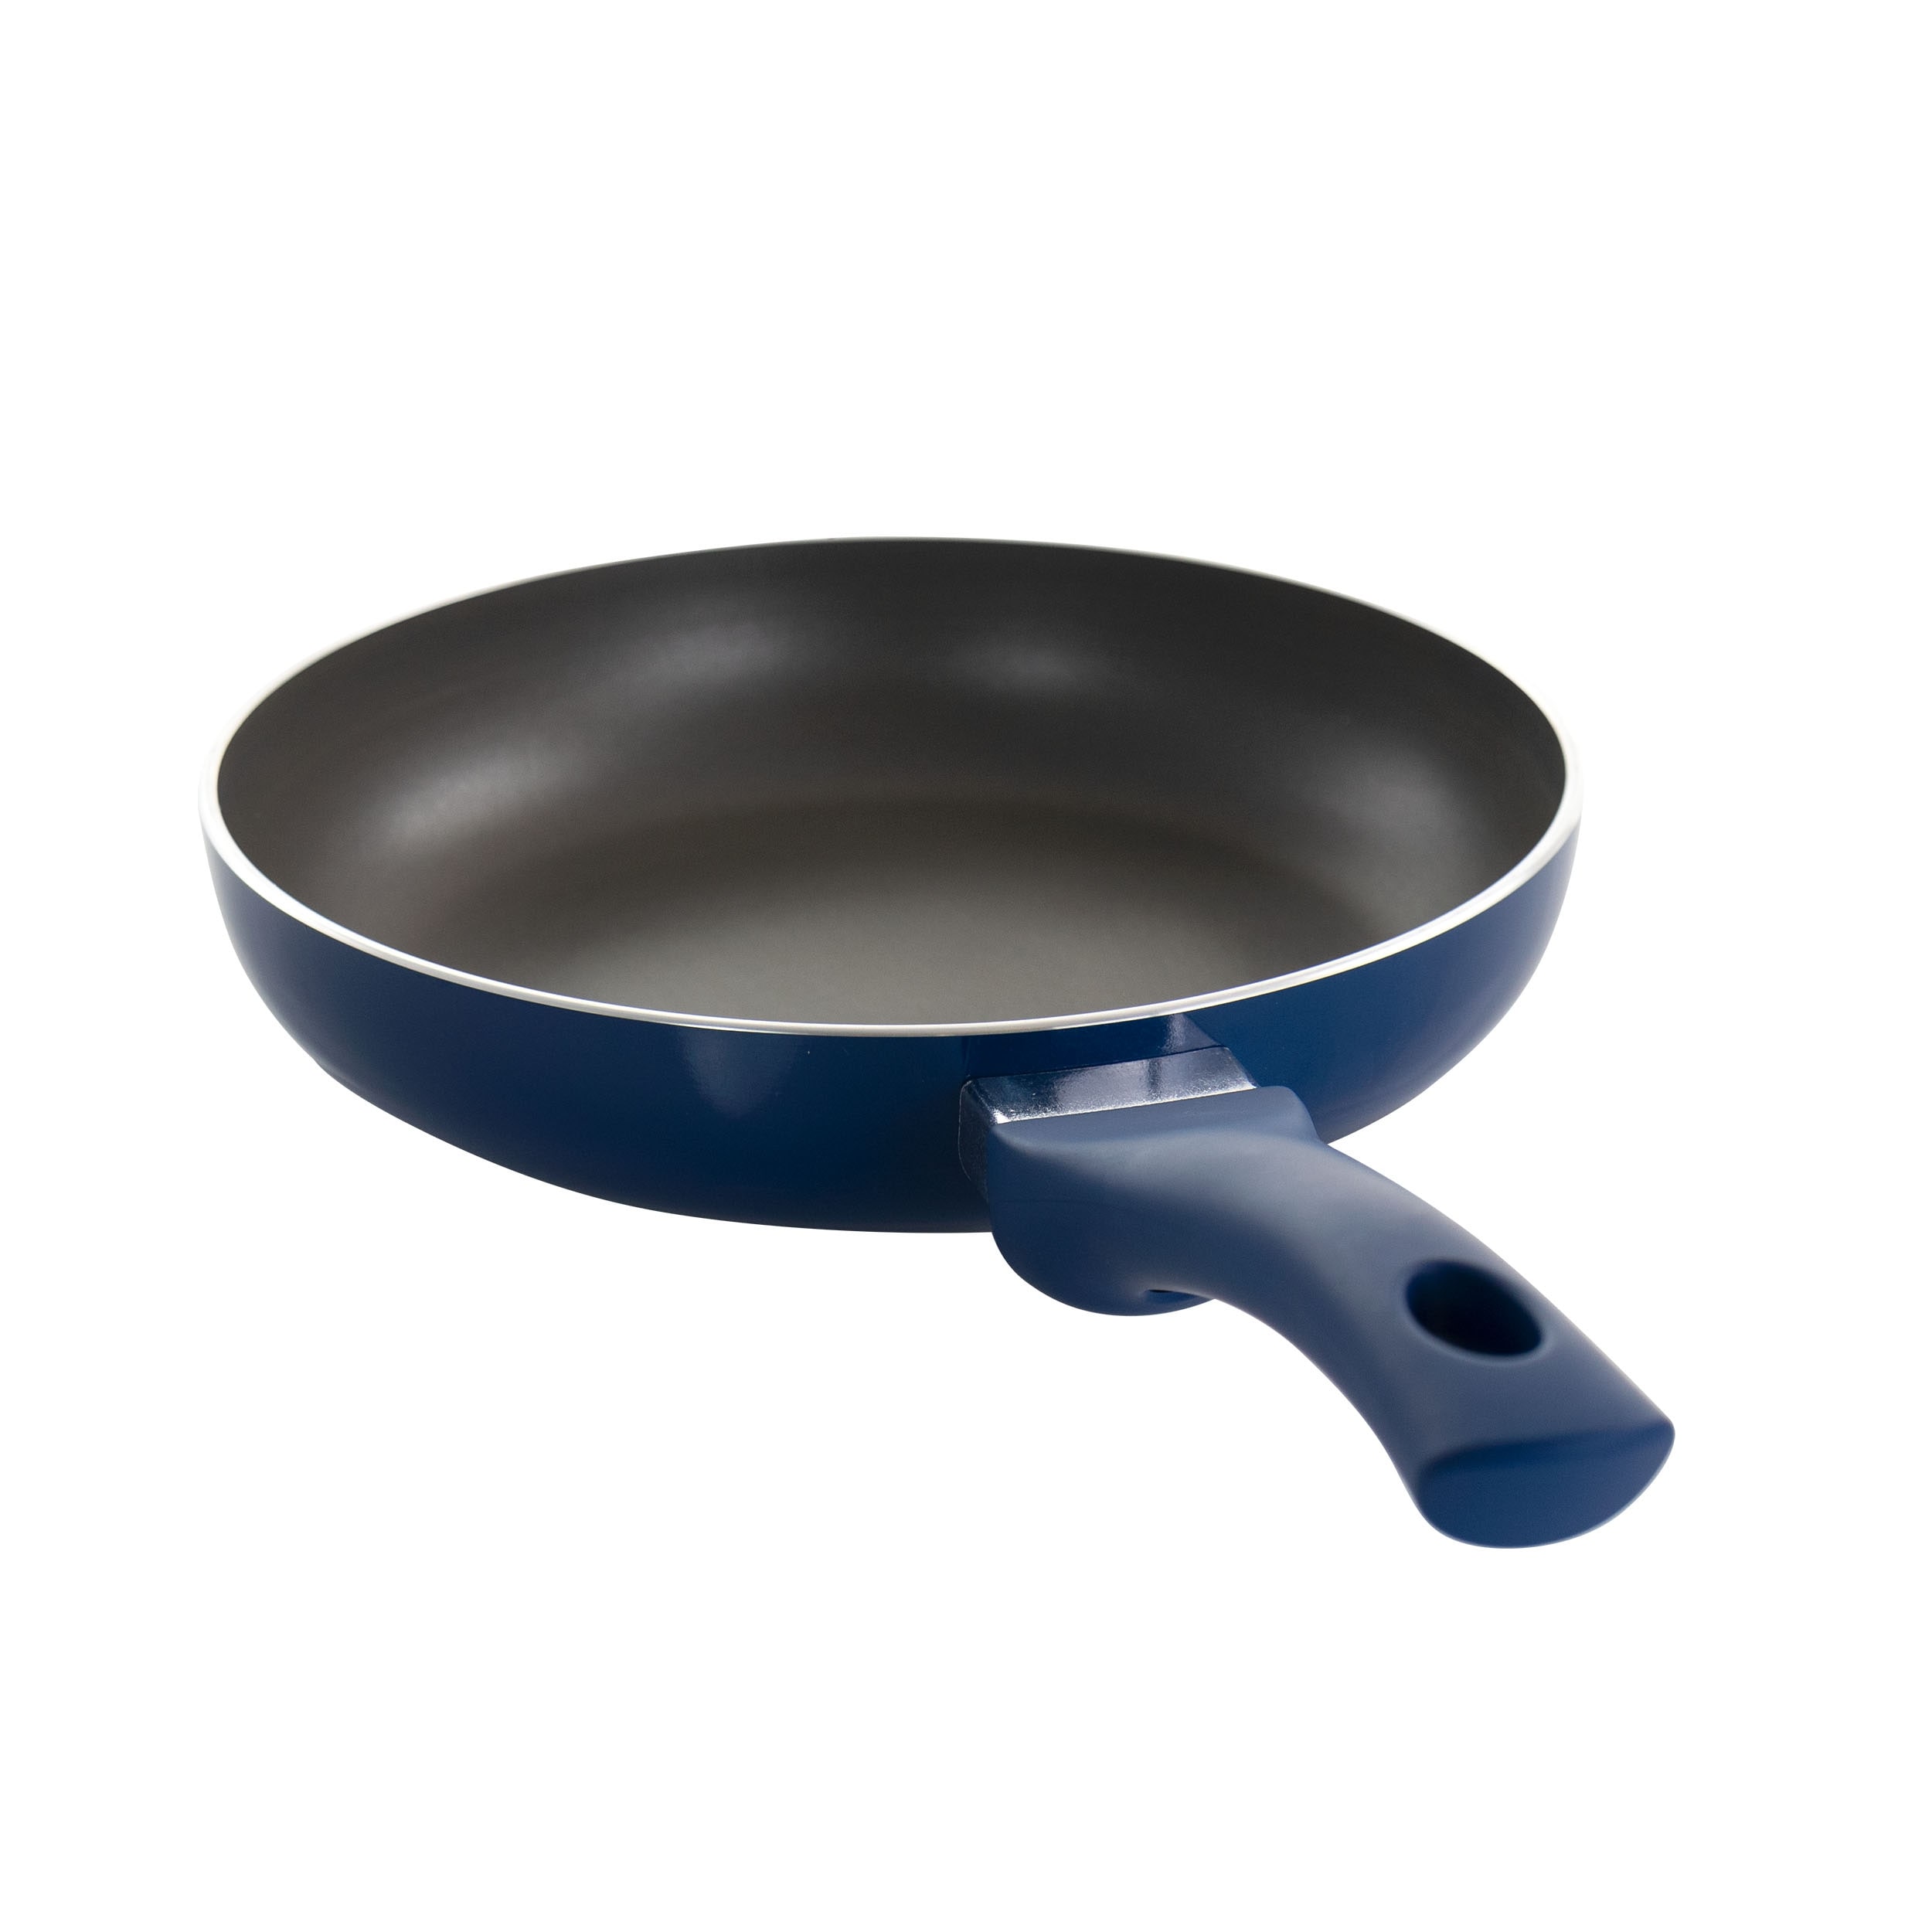 https://ak1.ostkcdn.com/images/products/is/images/direct/c0553c35a2ad1a22d3e3f517869cd4c66390bb86/Gibson-Home-Charmont-9.5-Inch-Nonstick-Aluminum-Frying-Pan-in-Yale-Blue.jpg